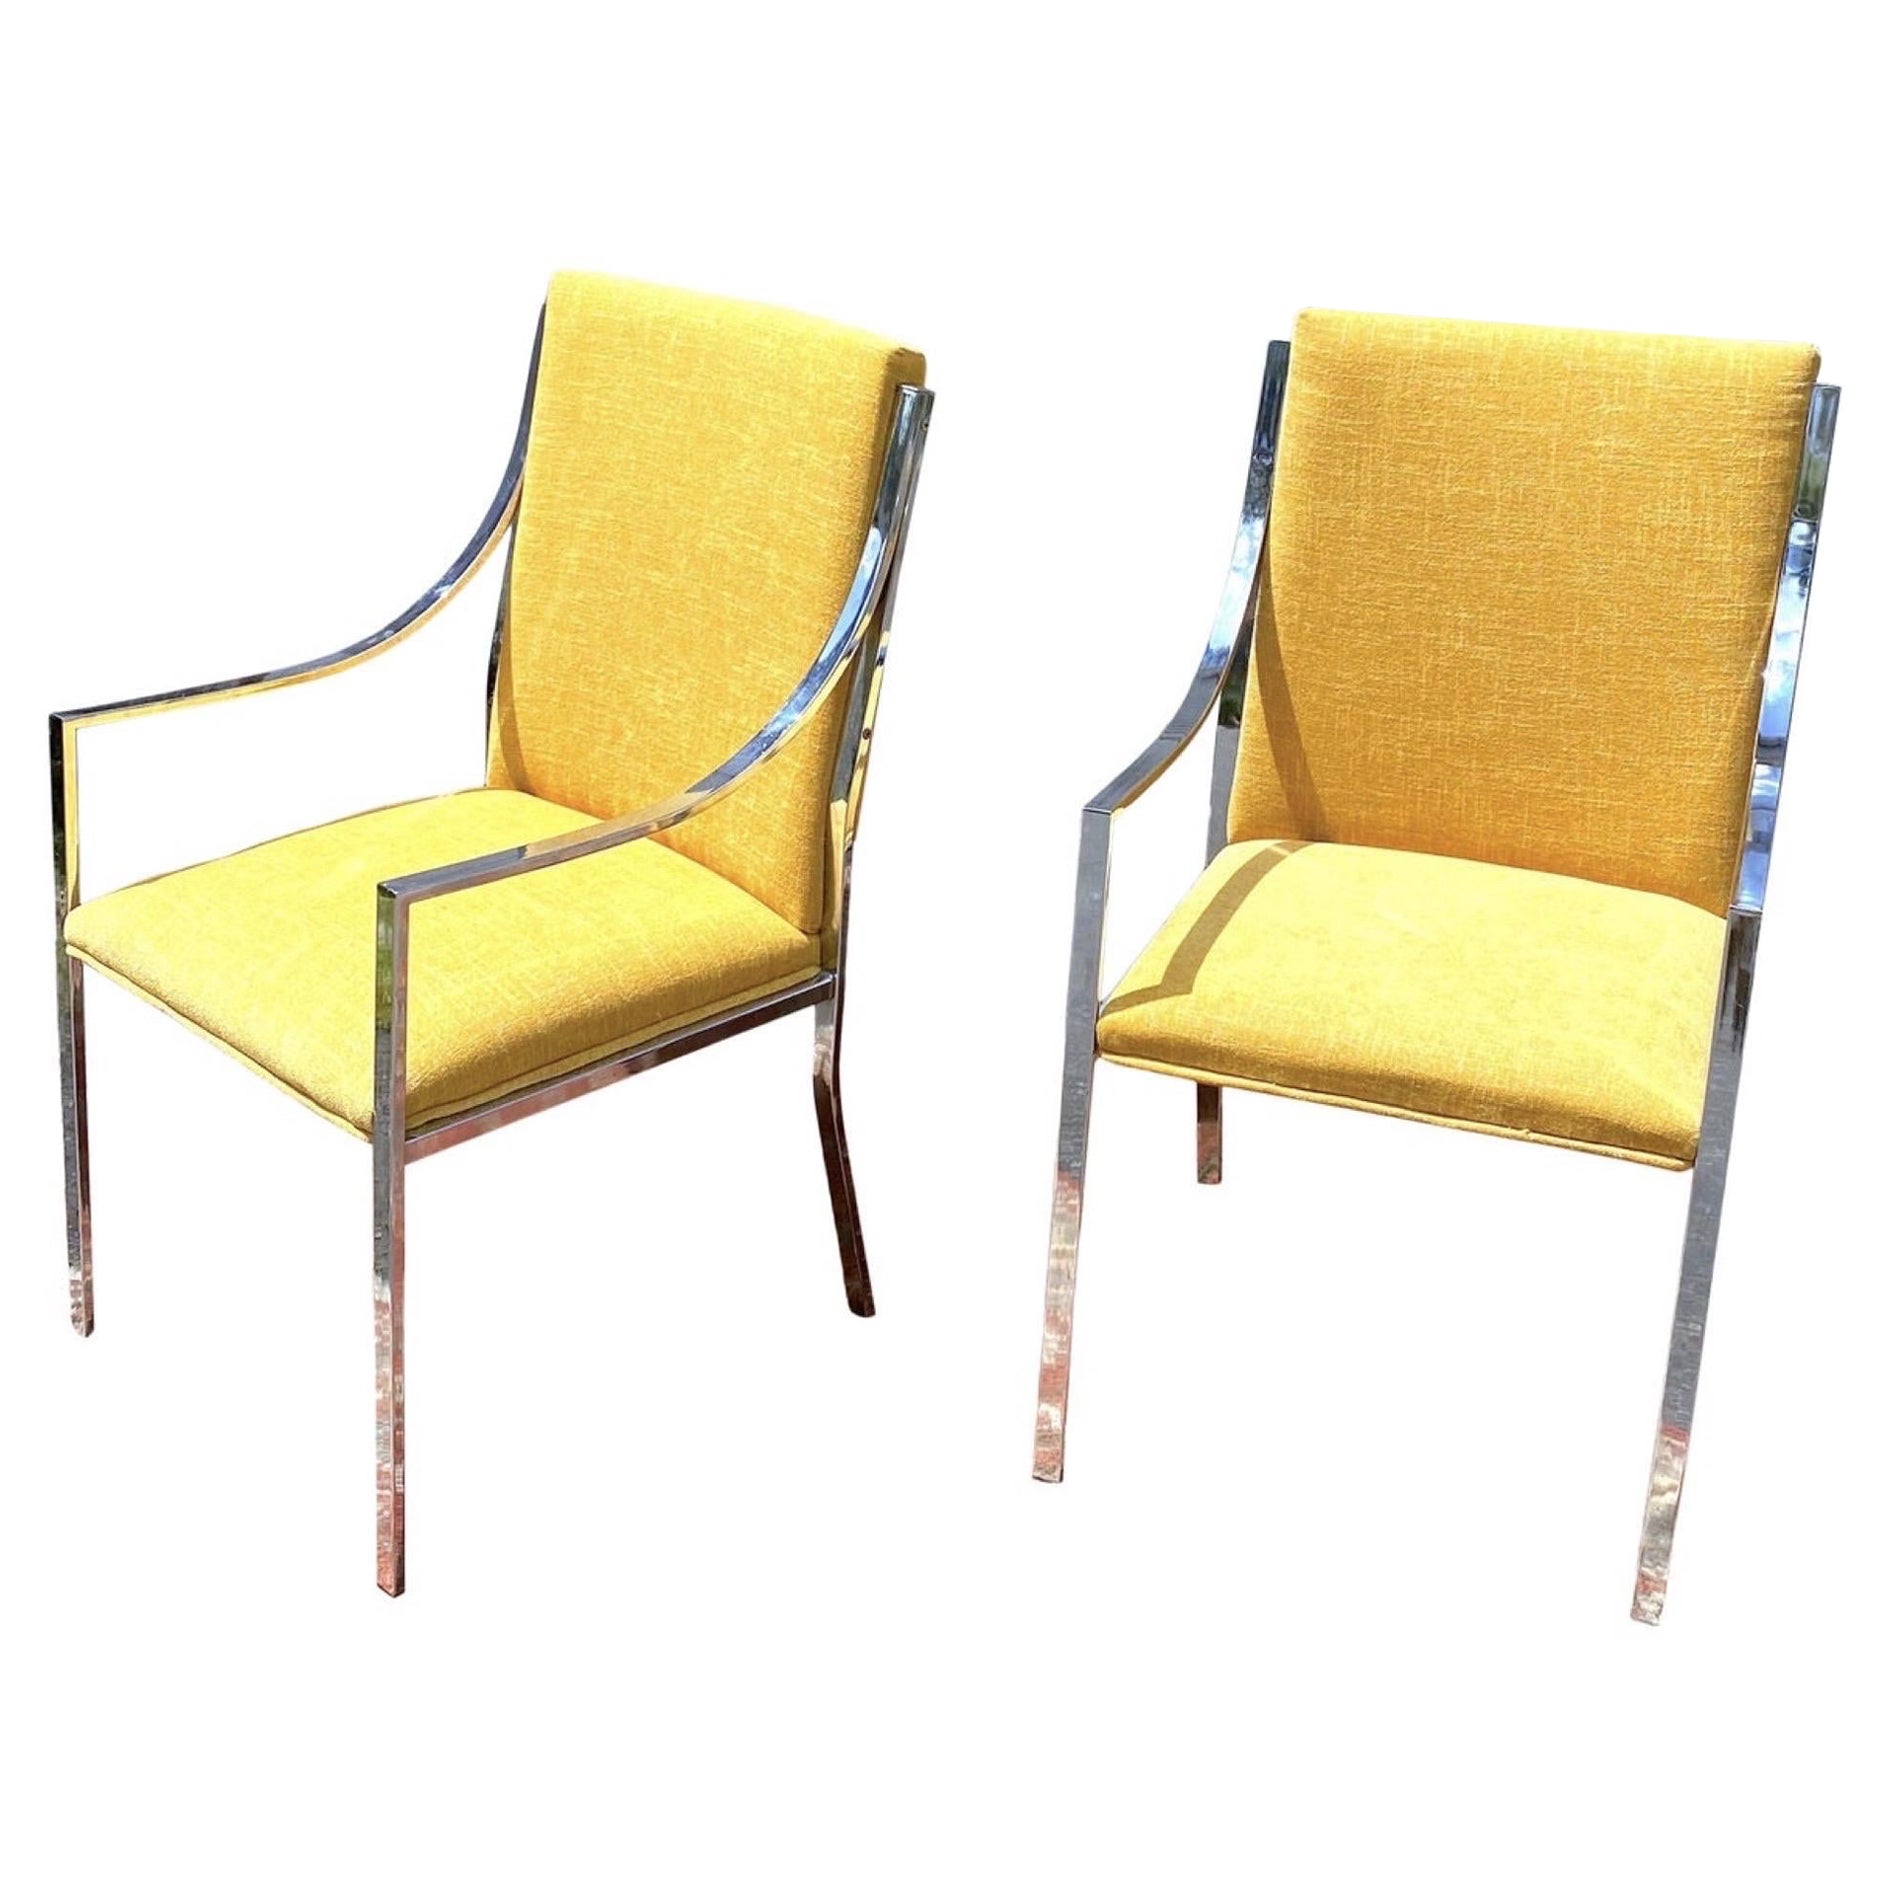 Pierre Cardin for Dillingham Chrome Occasional Chairs, Pair For Sale